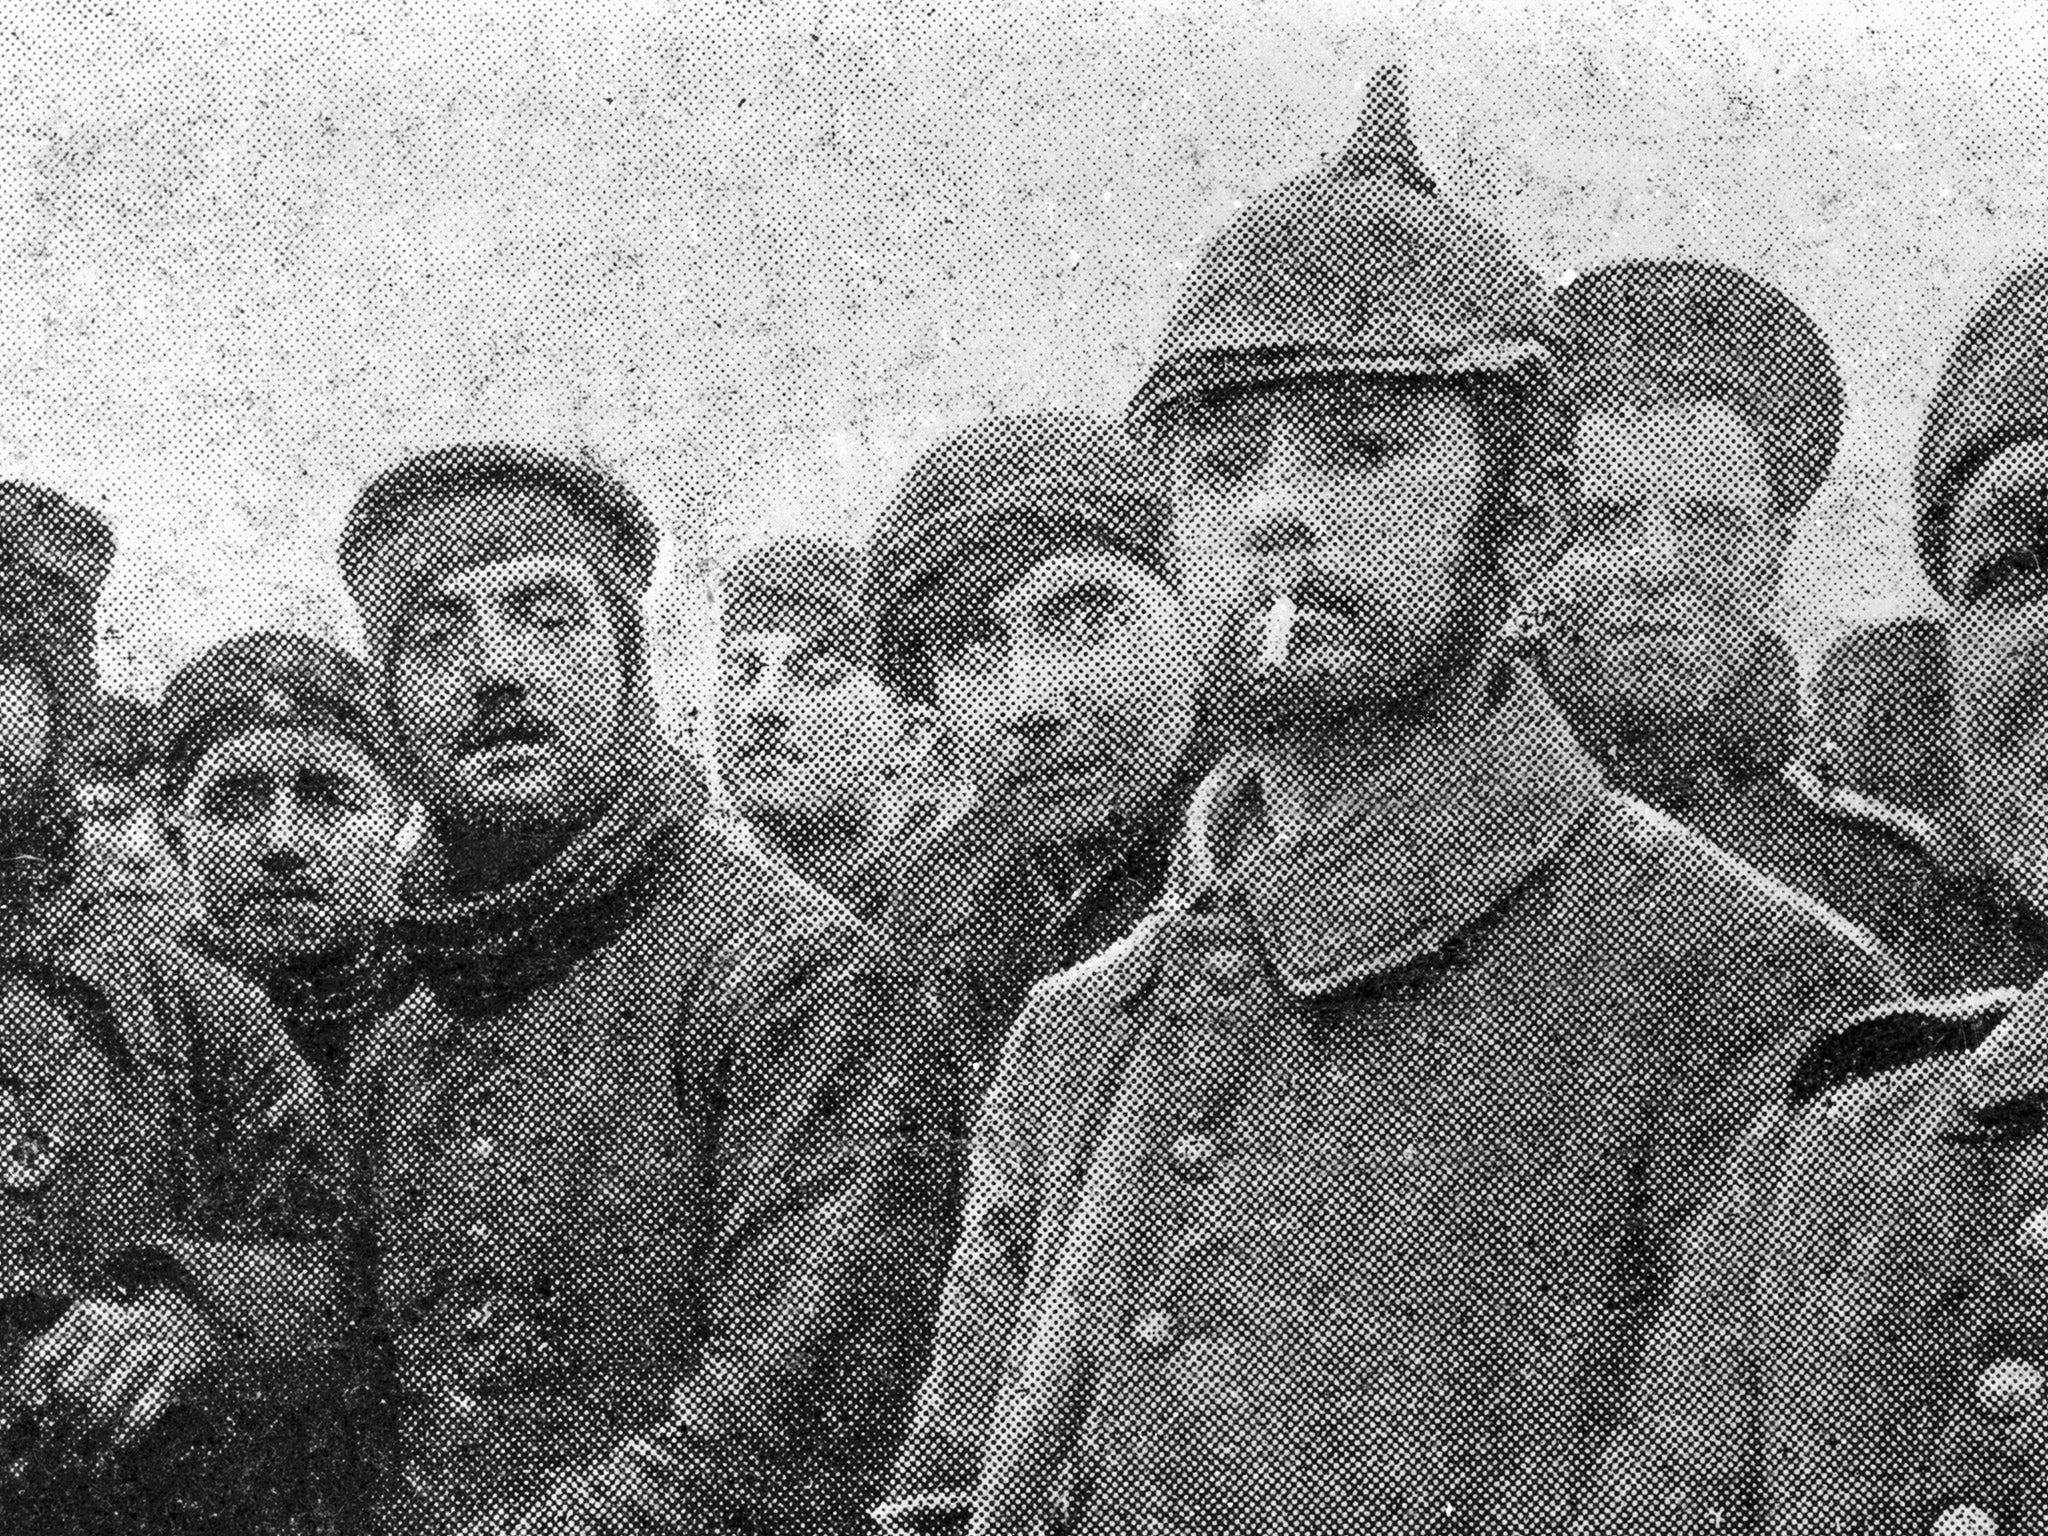 British and German troops make a Christmas and New Year truce in the trenches of the Western Front